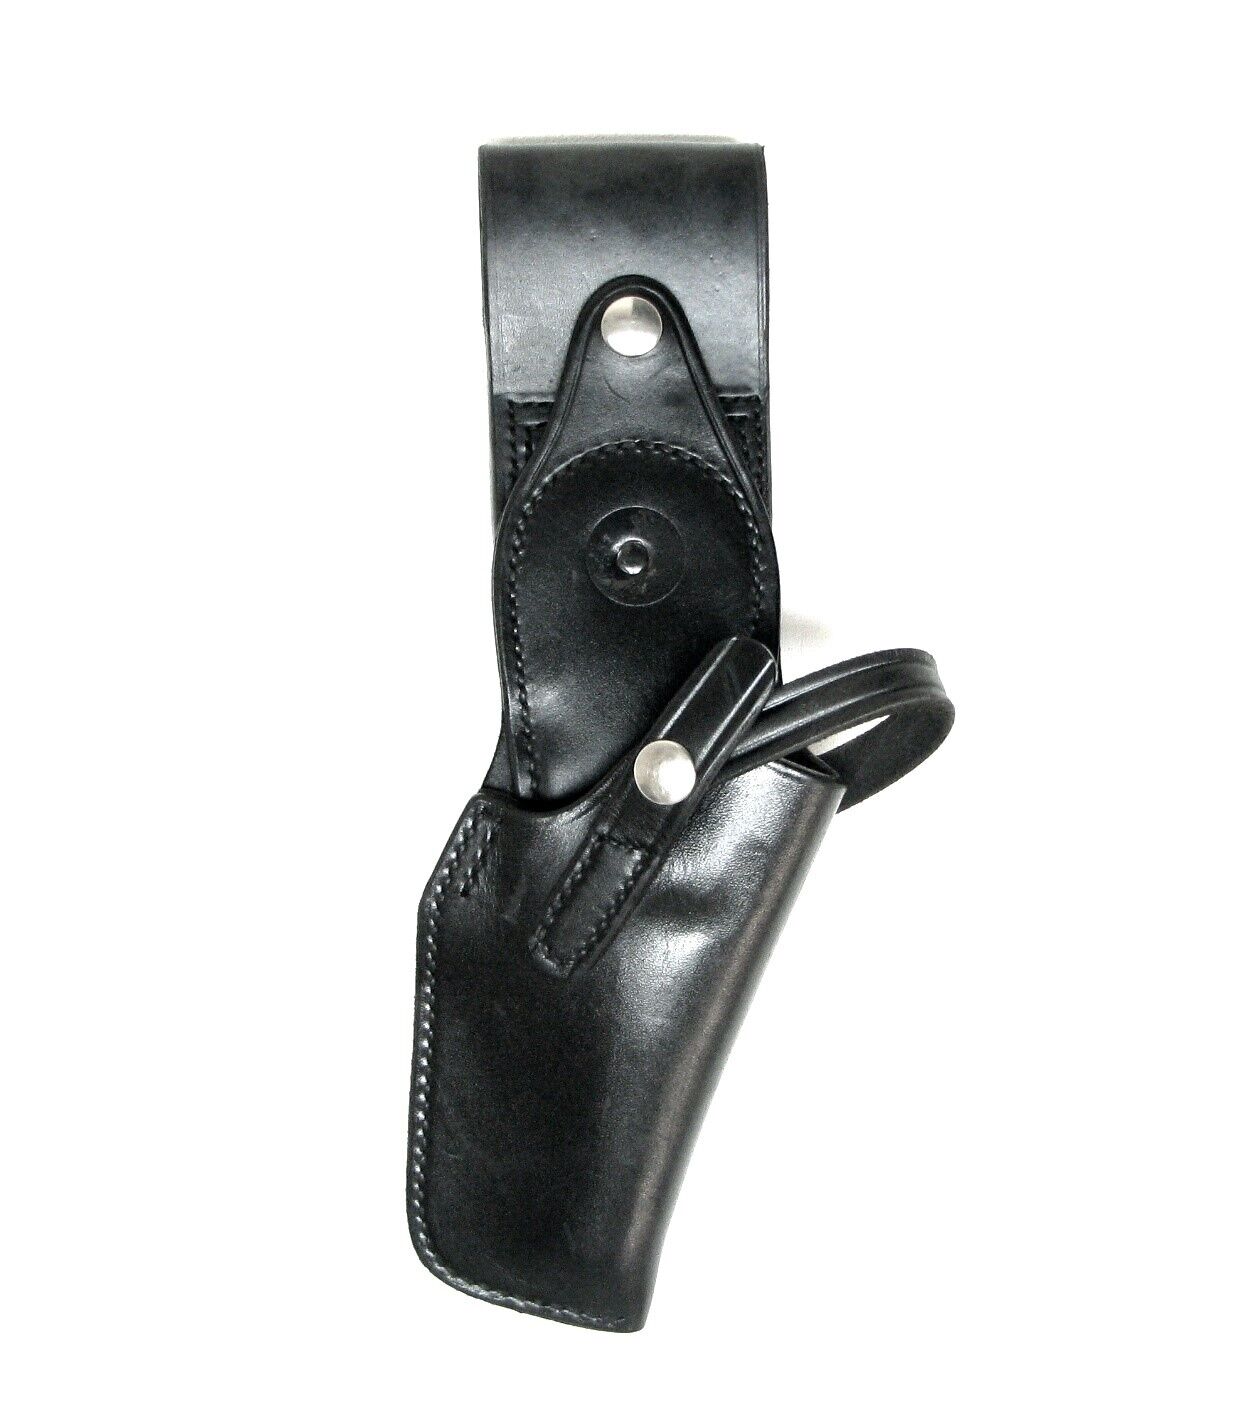 Swivel Holster fits 4-inch Smith & Wesson, Ruger, Colt